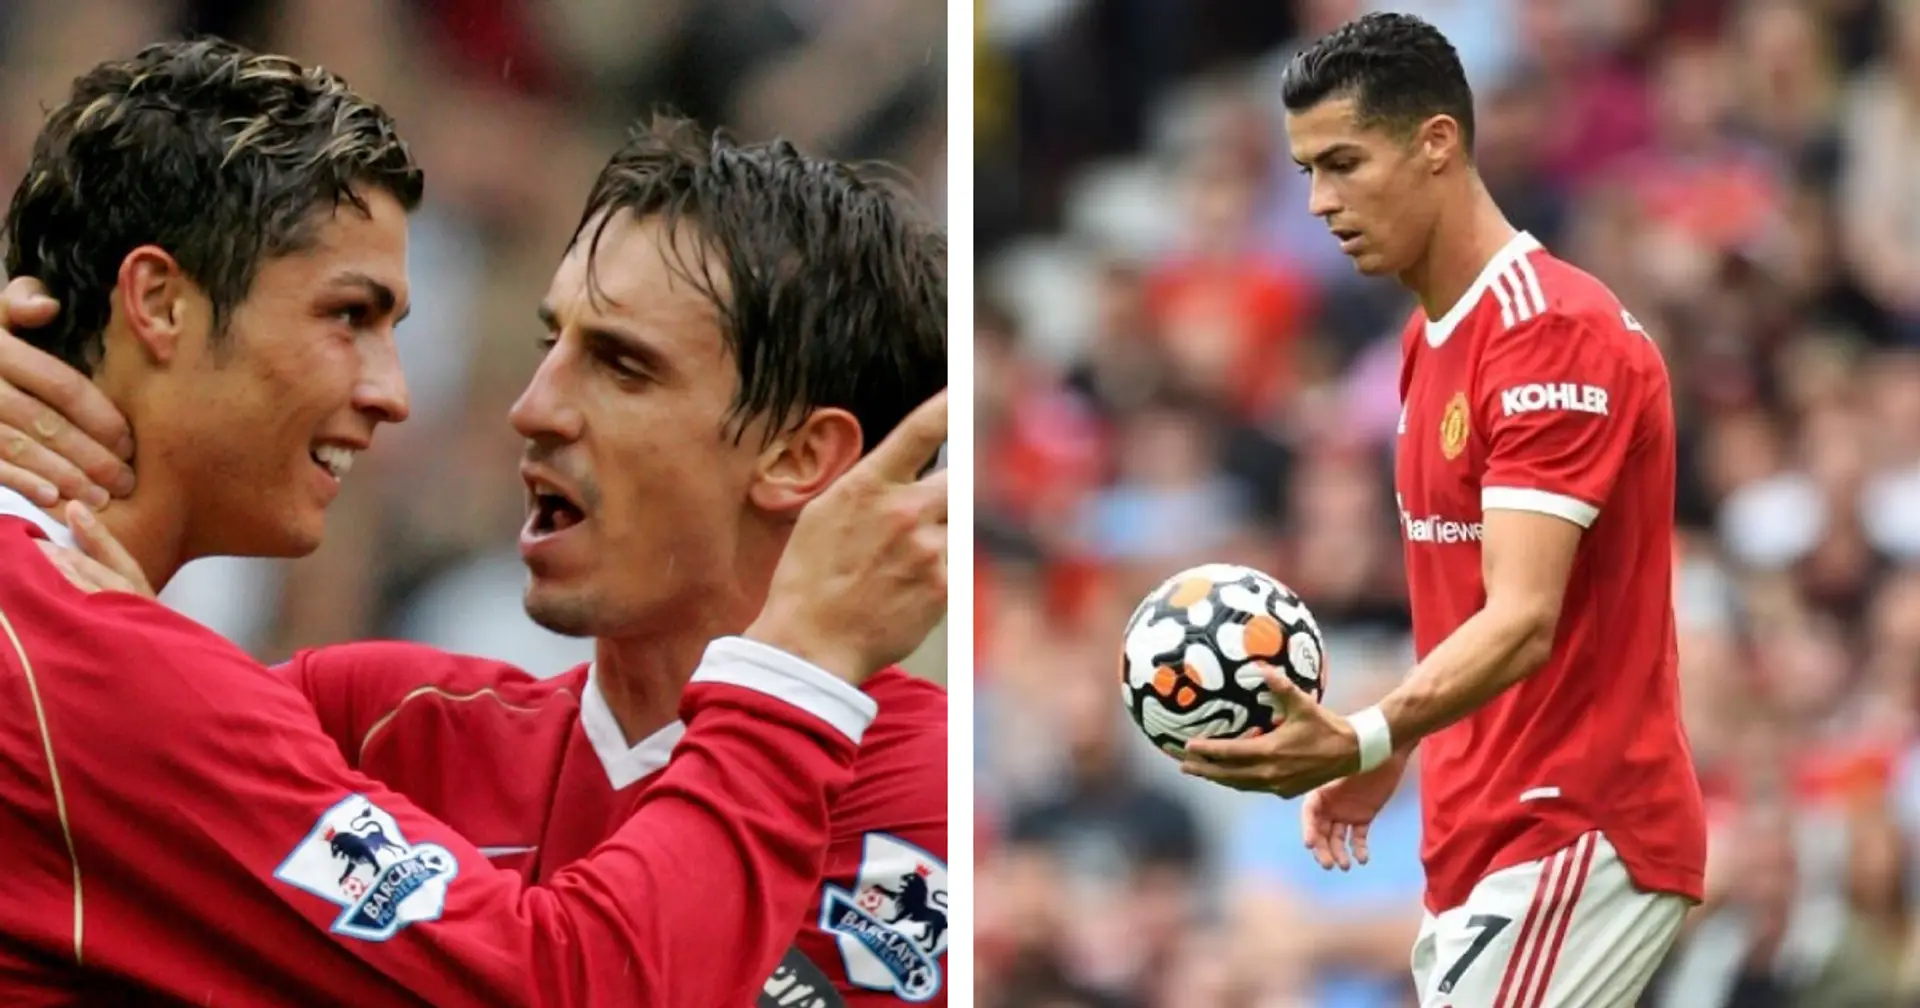 'That was the same in 2008': Gary Neville names 1 key problem at Man United after Ronaldo's arrival